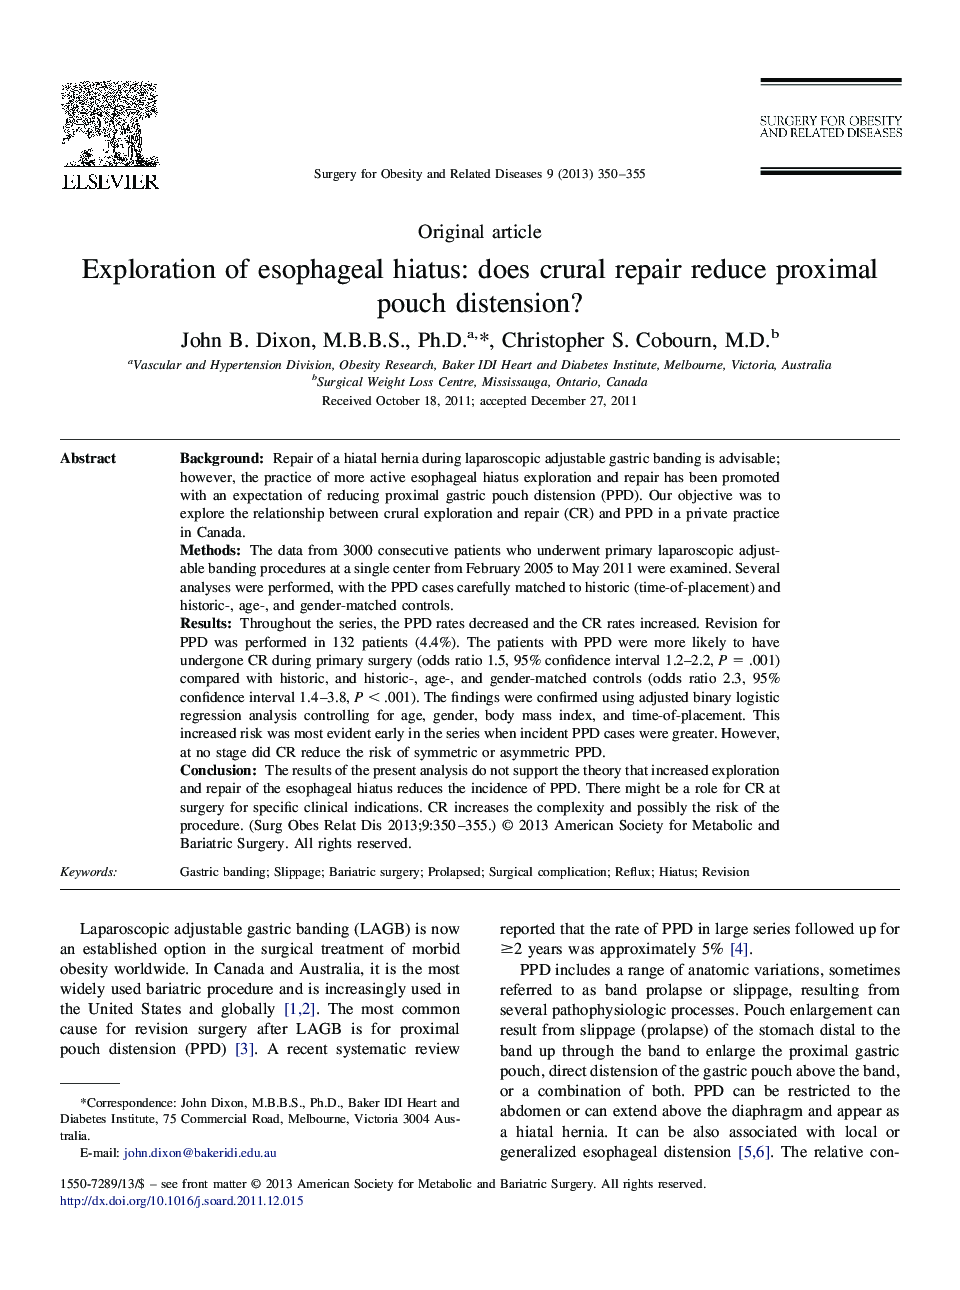 Exploration of esophageal hiatus: does crural repair reduce proximal pouch distension?